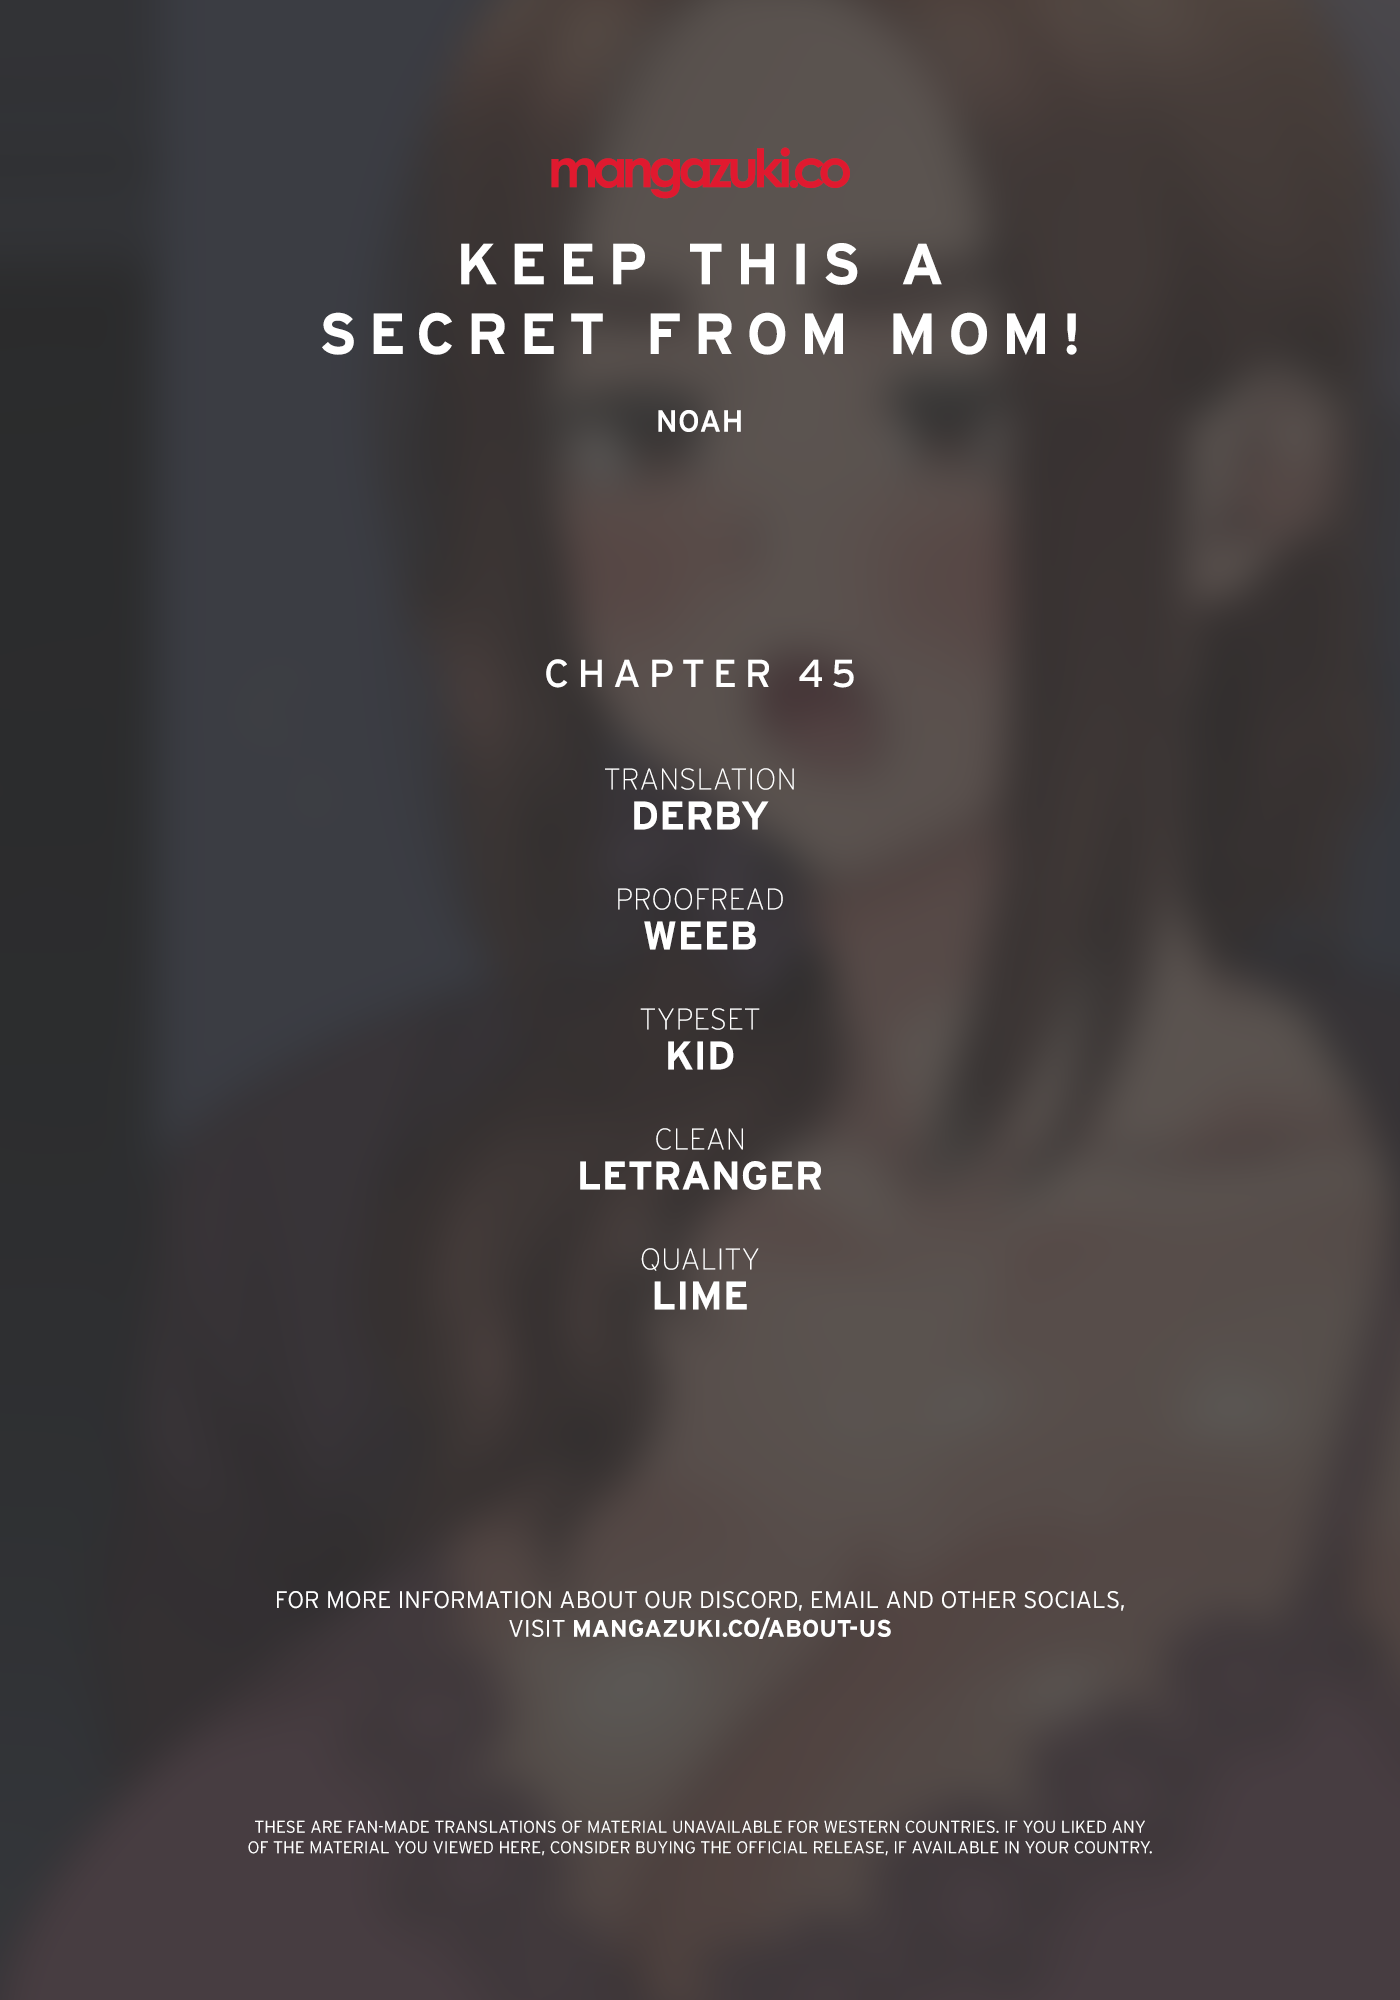 Keep This a Secret From Mom! image